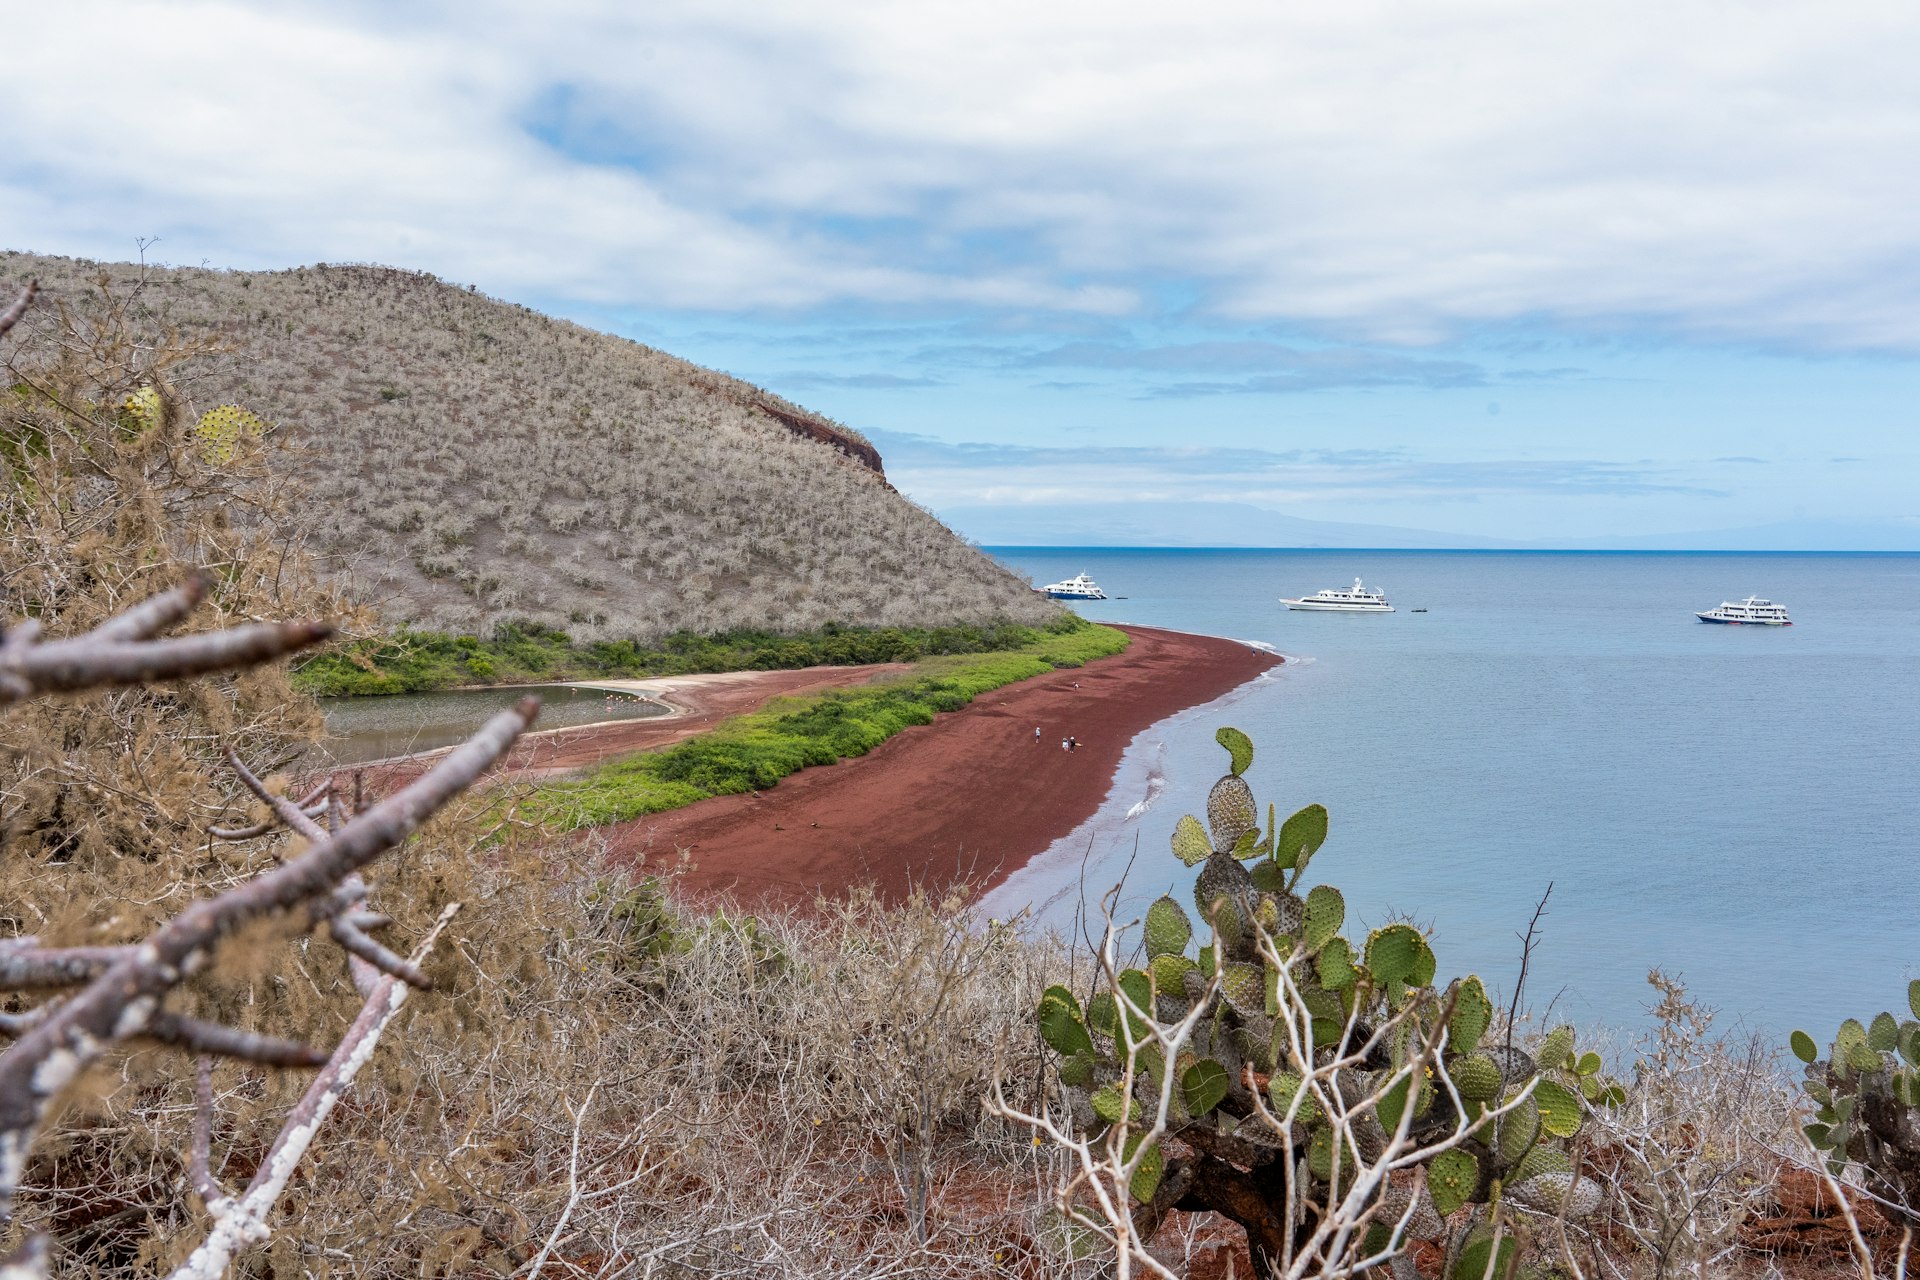 Landscape view of an island and ocean in the Galapagos